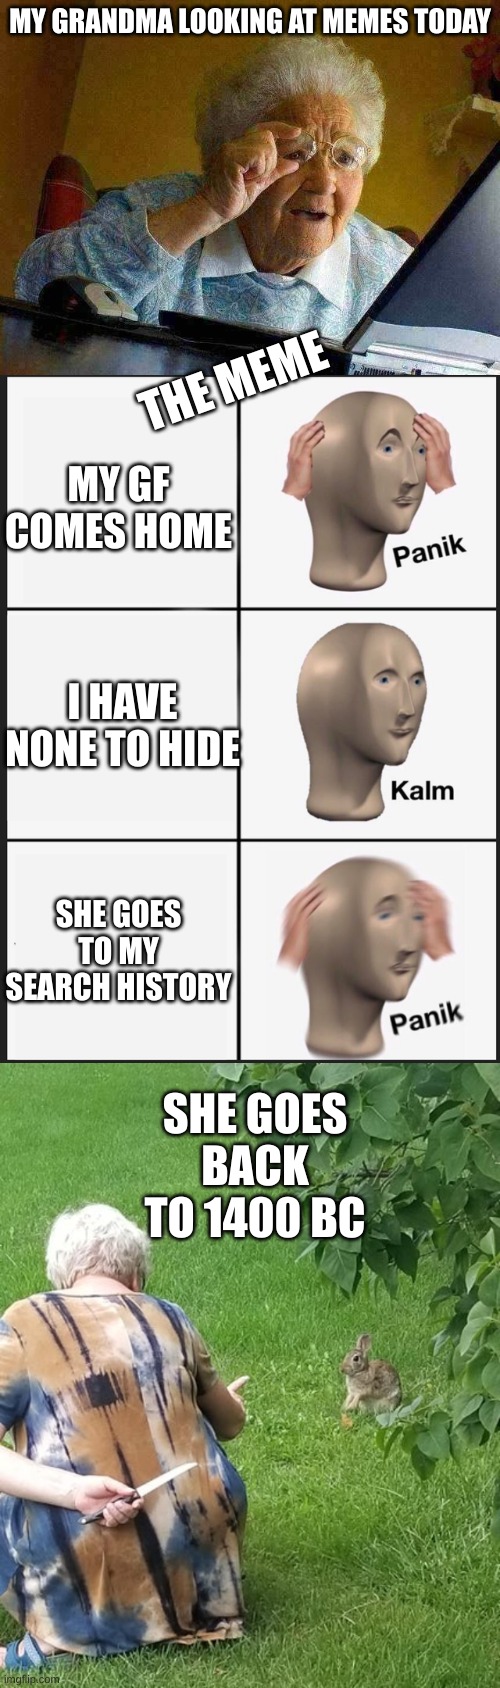 MY GRANDMA LOOKING AT MEMES TODAY; THE MEME; MY GF COMES HOME; I HAVE NONE TO HIDE; SHE GOES TO MY SEARCH HISTORY; SHE GOES BACK TO 1400 BC | image tagged in memes,grandma finds the internet,panik kalm panik,grandma hiding knife rabbit | made w/ Imgflip meme maker